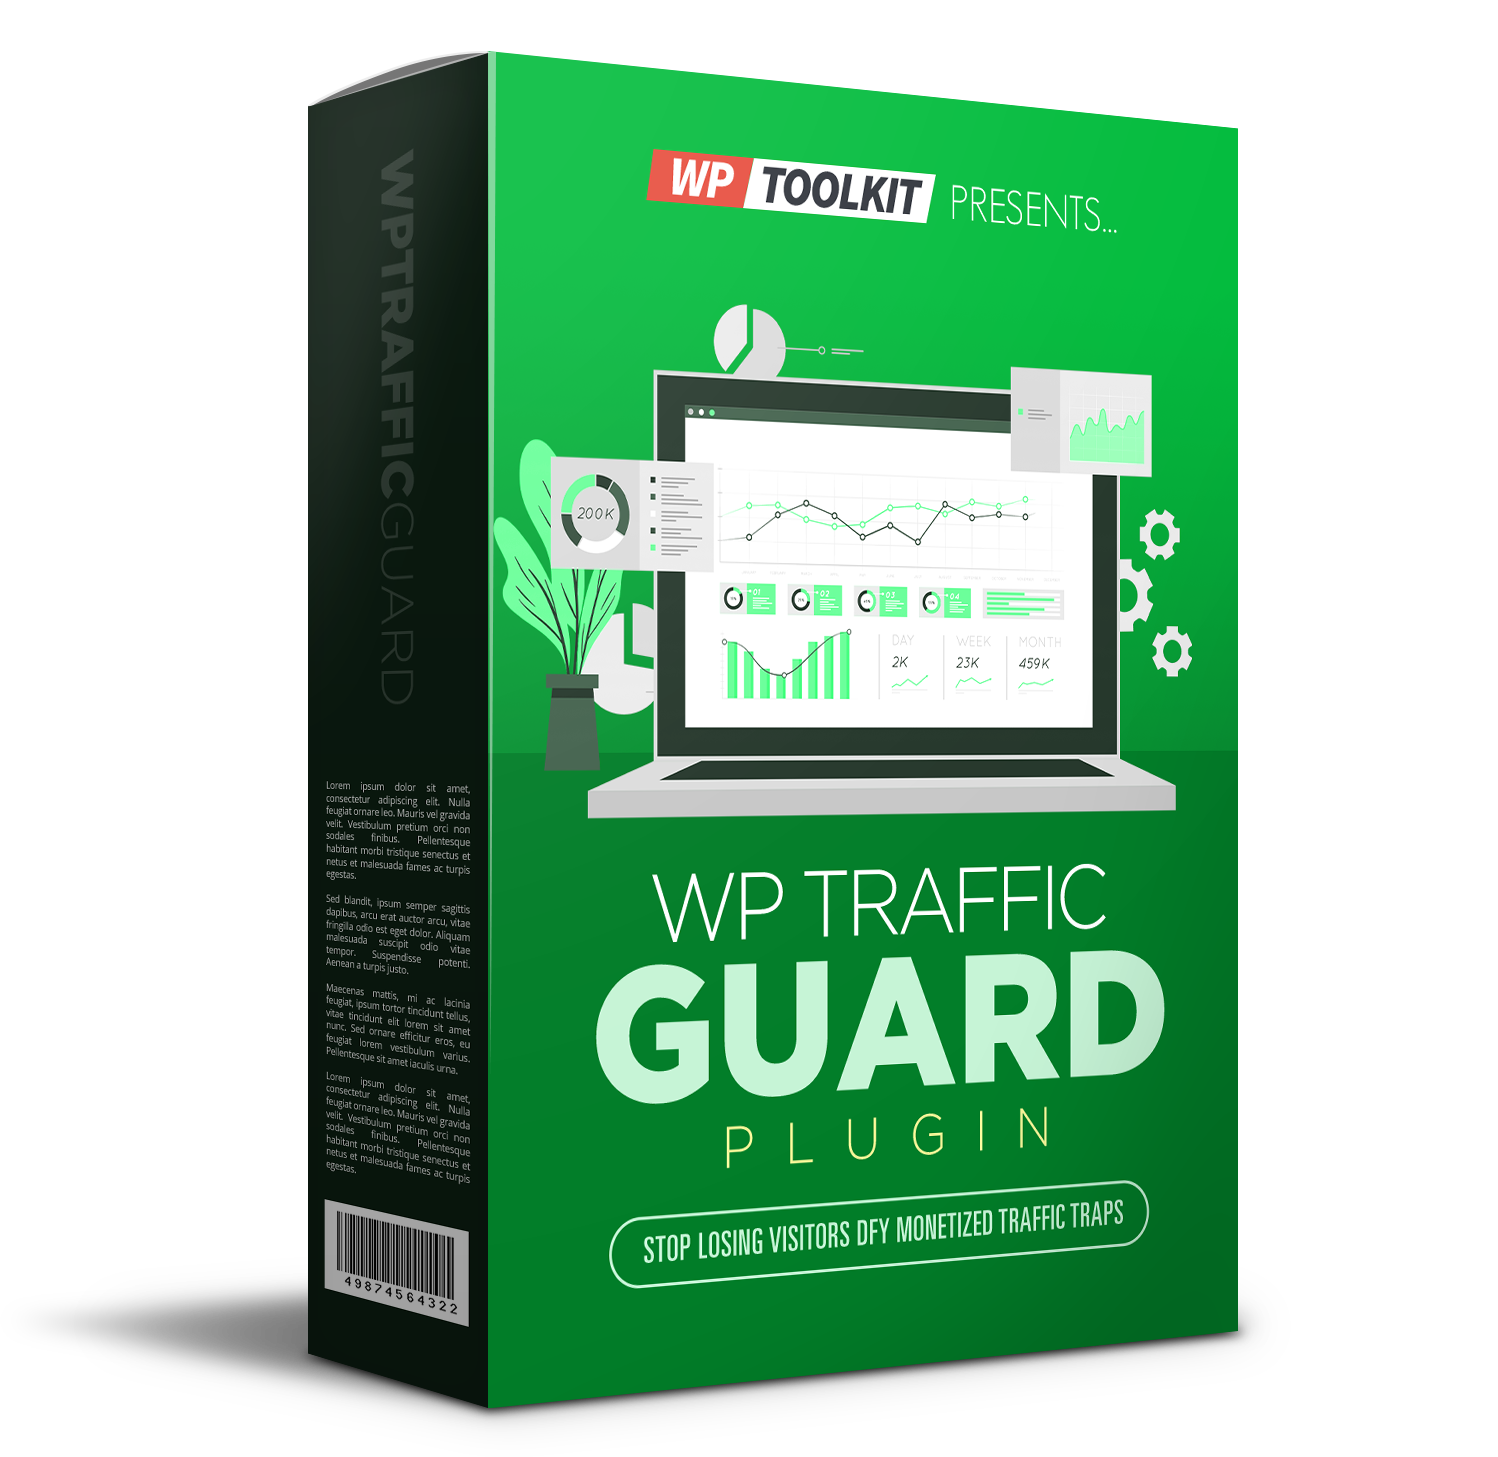 wp toolkit traffic guard review